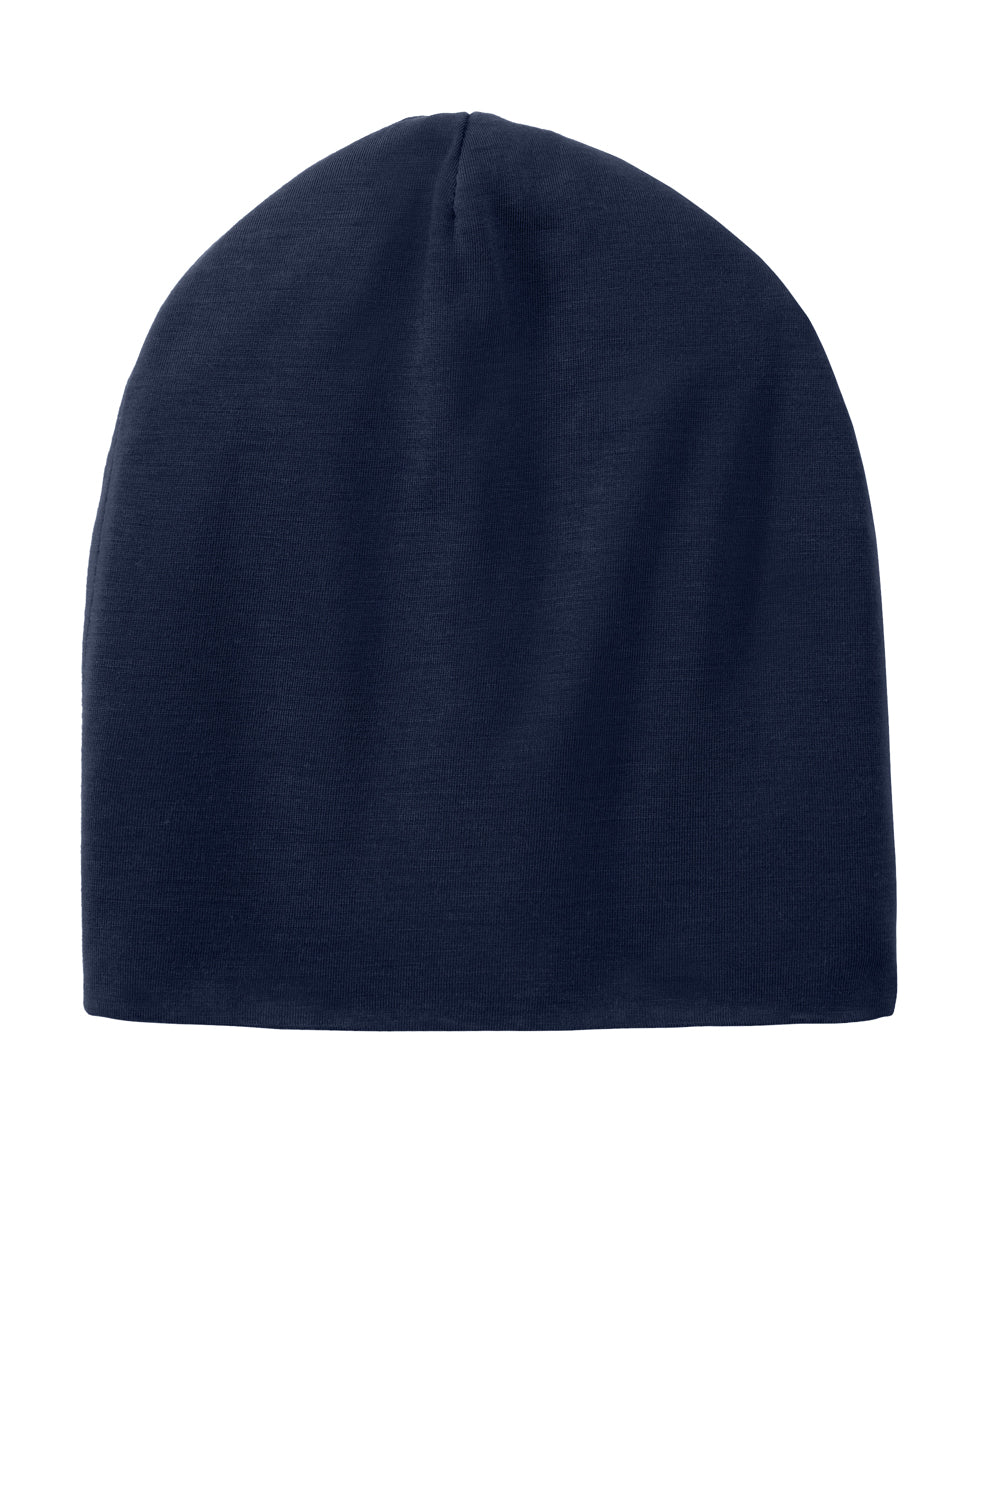 Sport-Tek STC35 PosiCharge Competitor Jersey Knit Slouch Beanie True Navy Blue Front